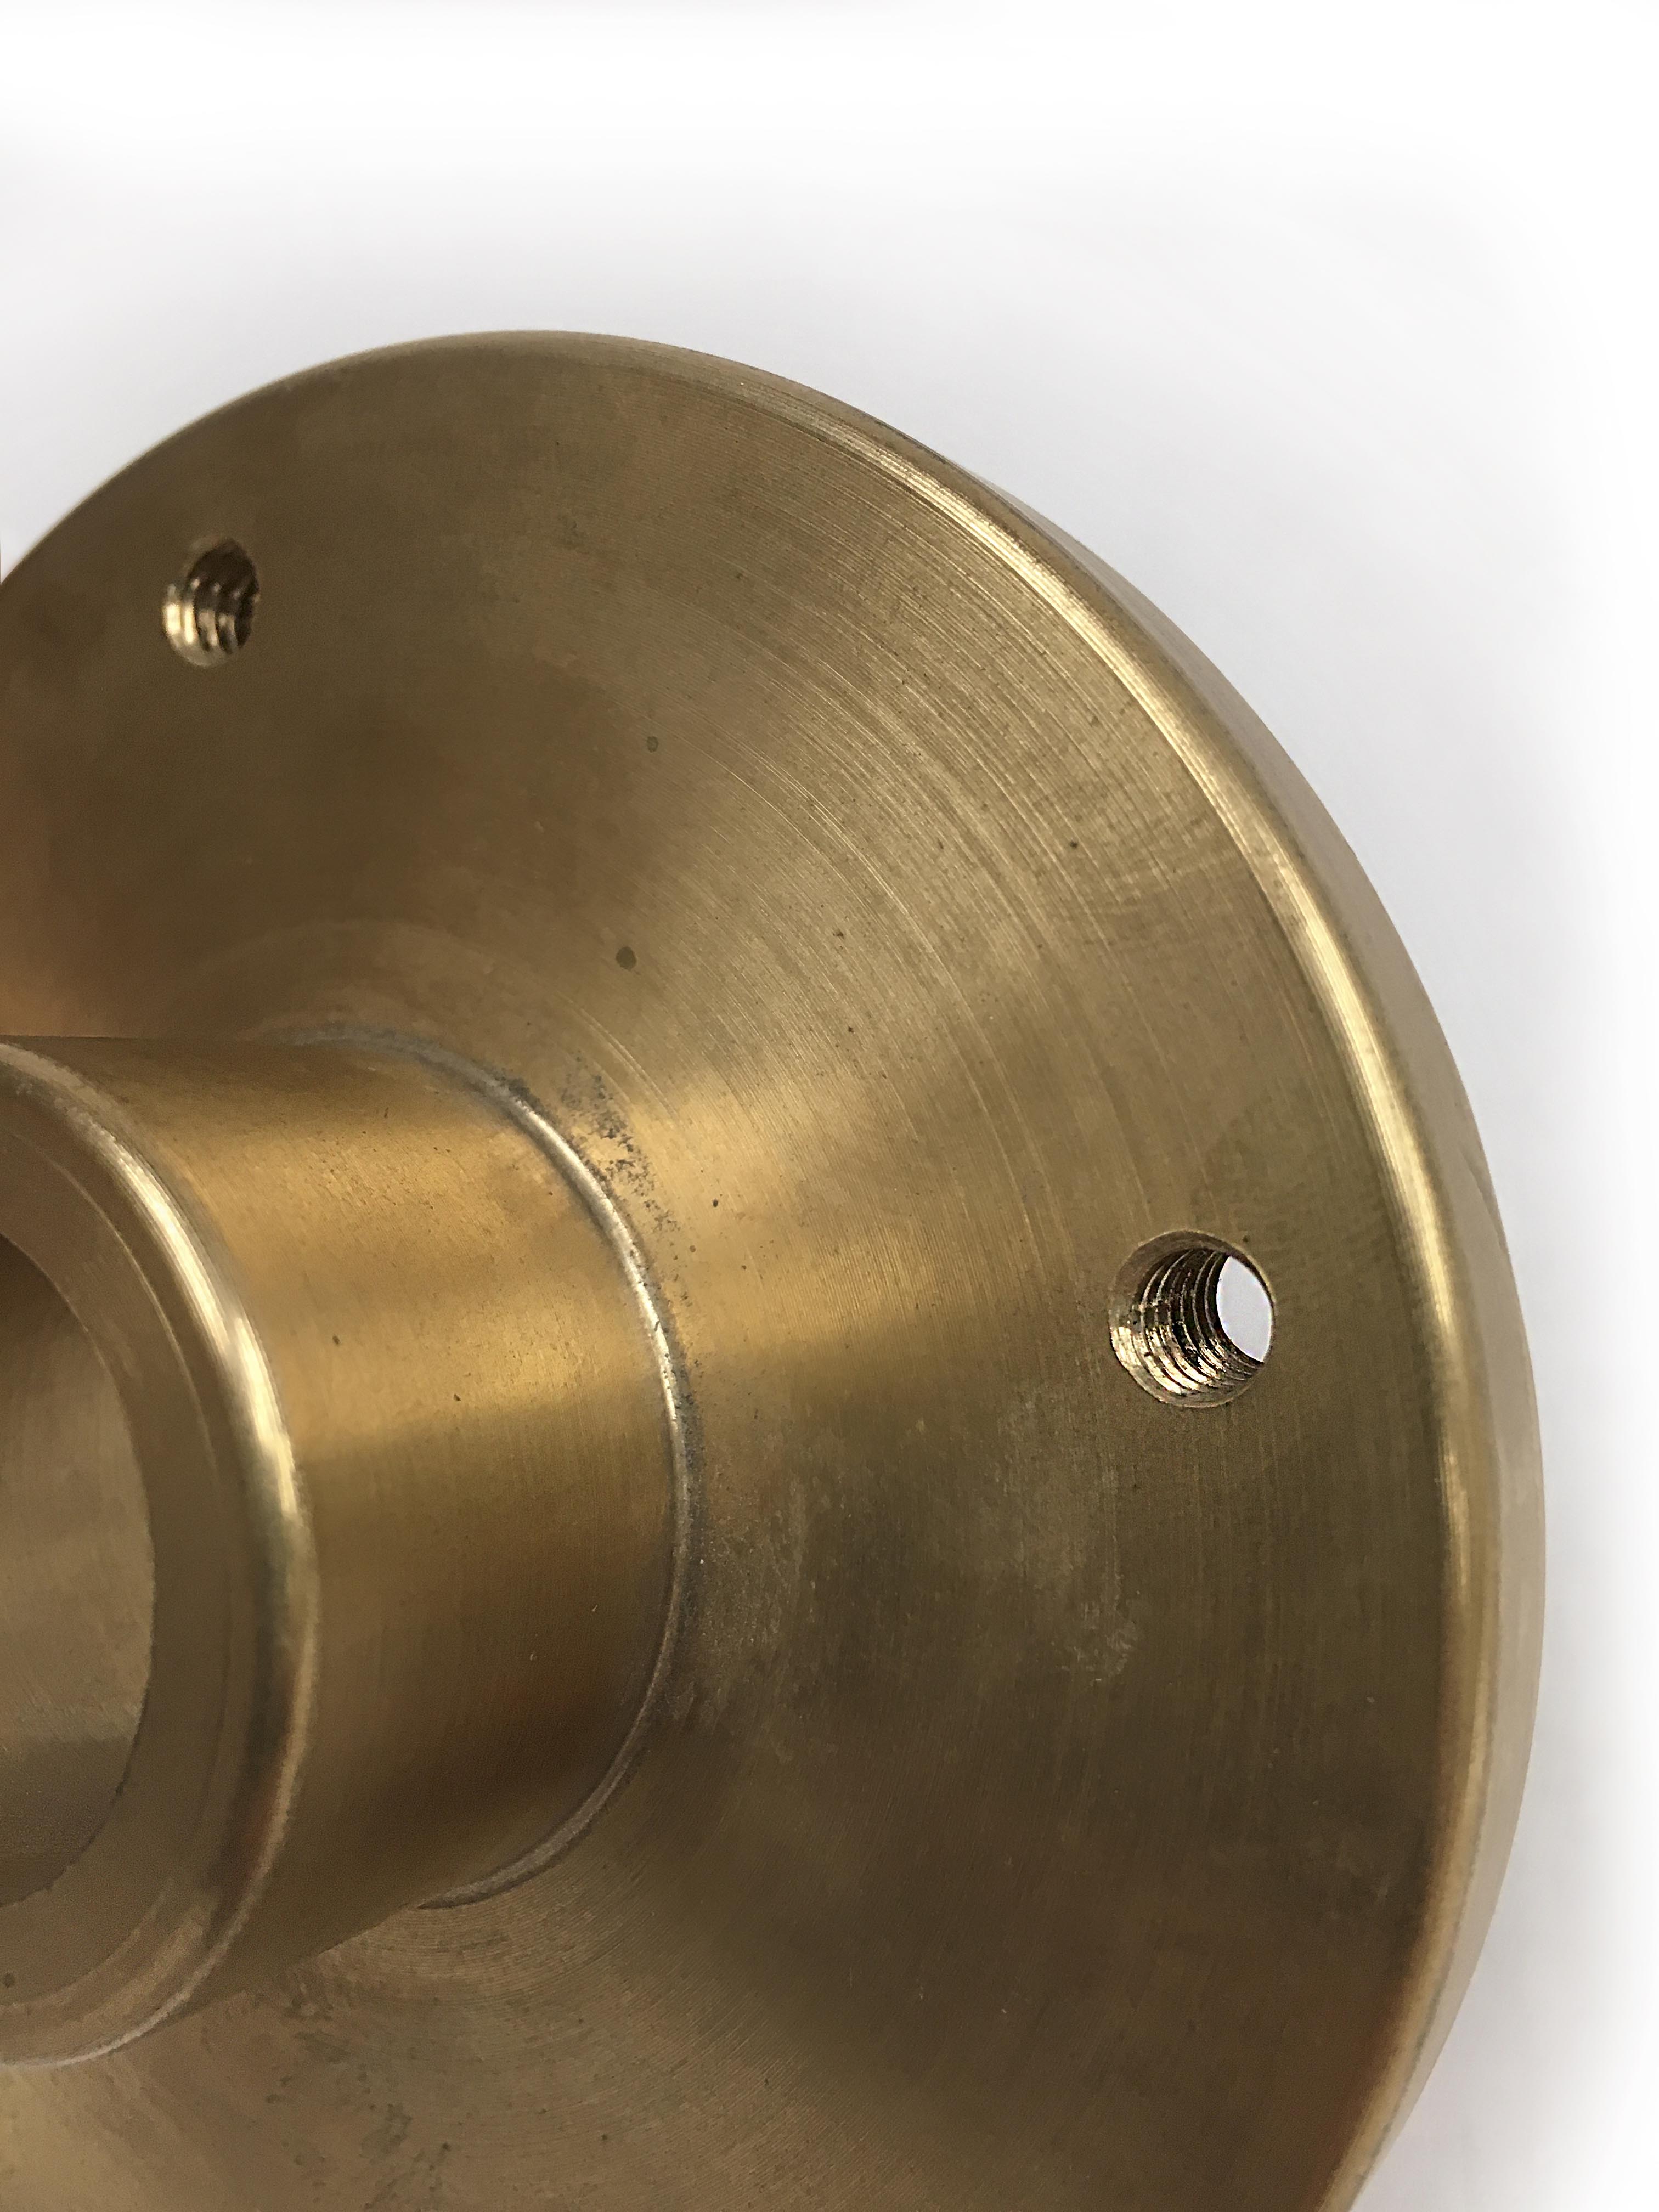 Machined Part - Bronze bushing: (4) ¼ in.-20 tapped holes equally spaced on a 3 ¼ in. B.C.